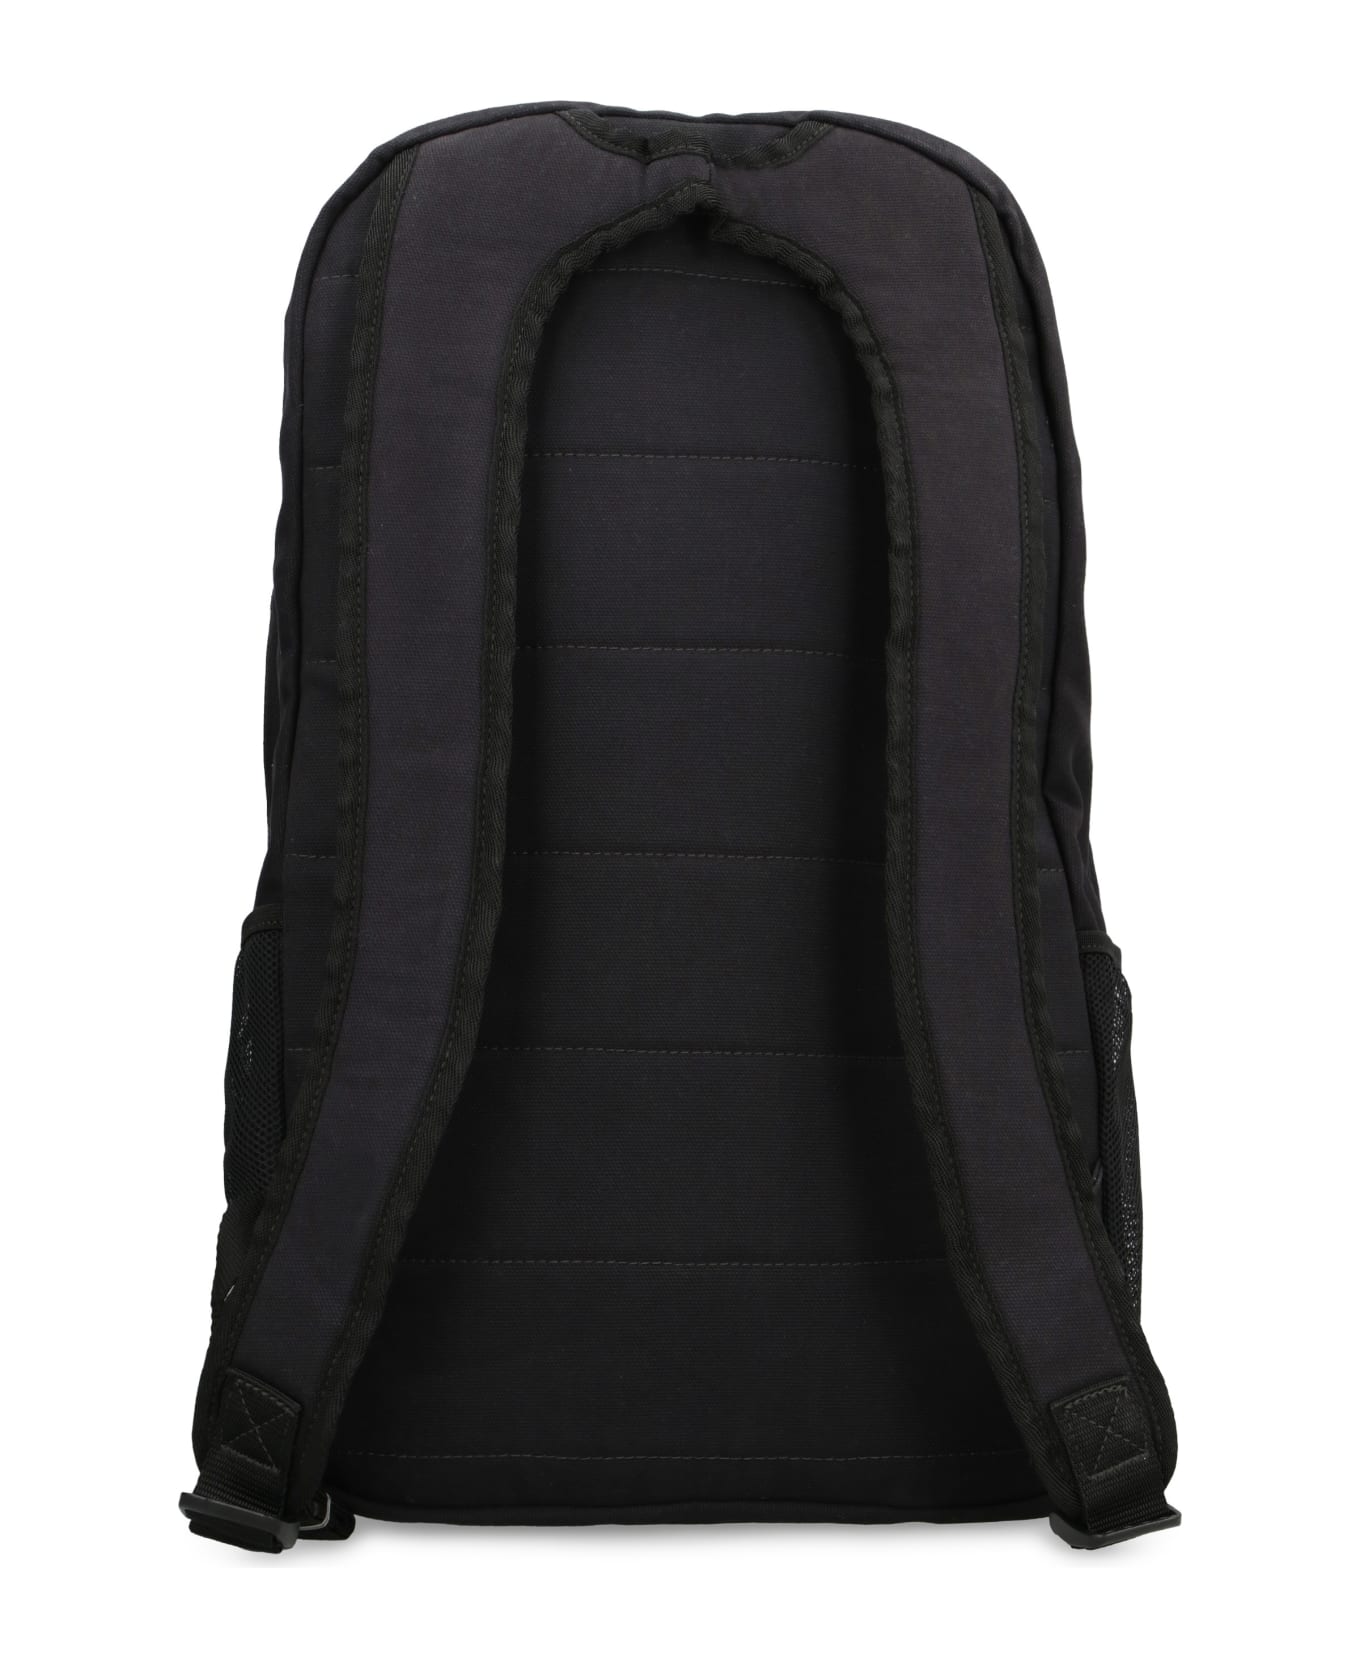 Dickies Canvas Backpack - black バックパック